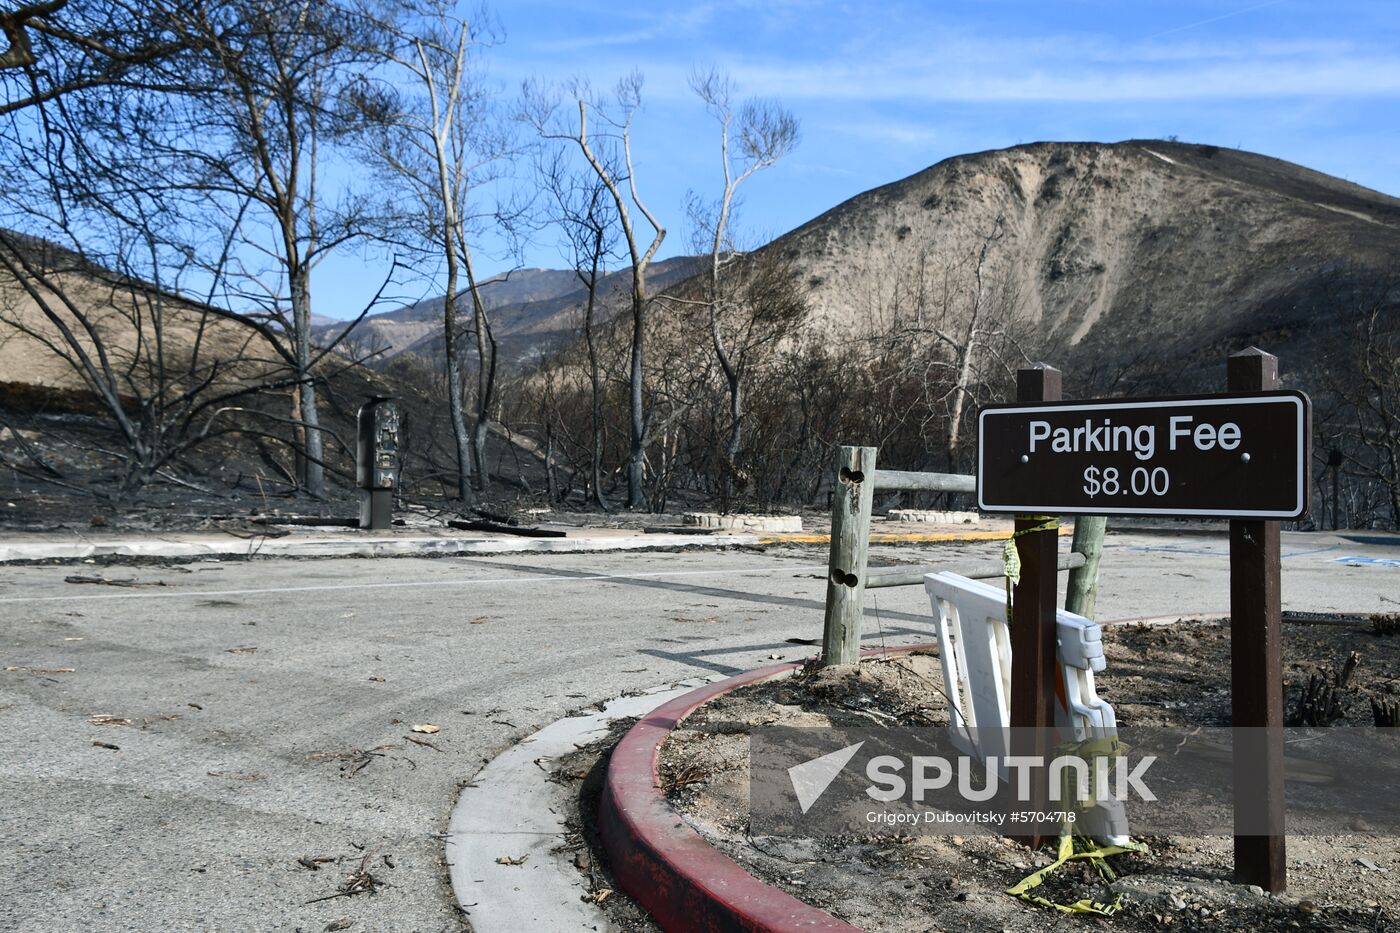 Consequences of wildfires in California